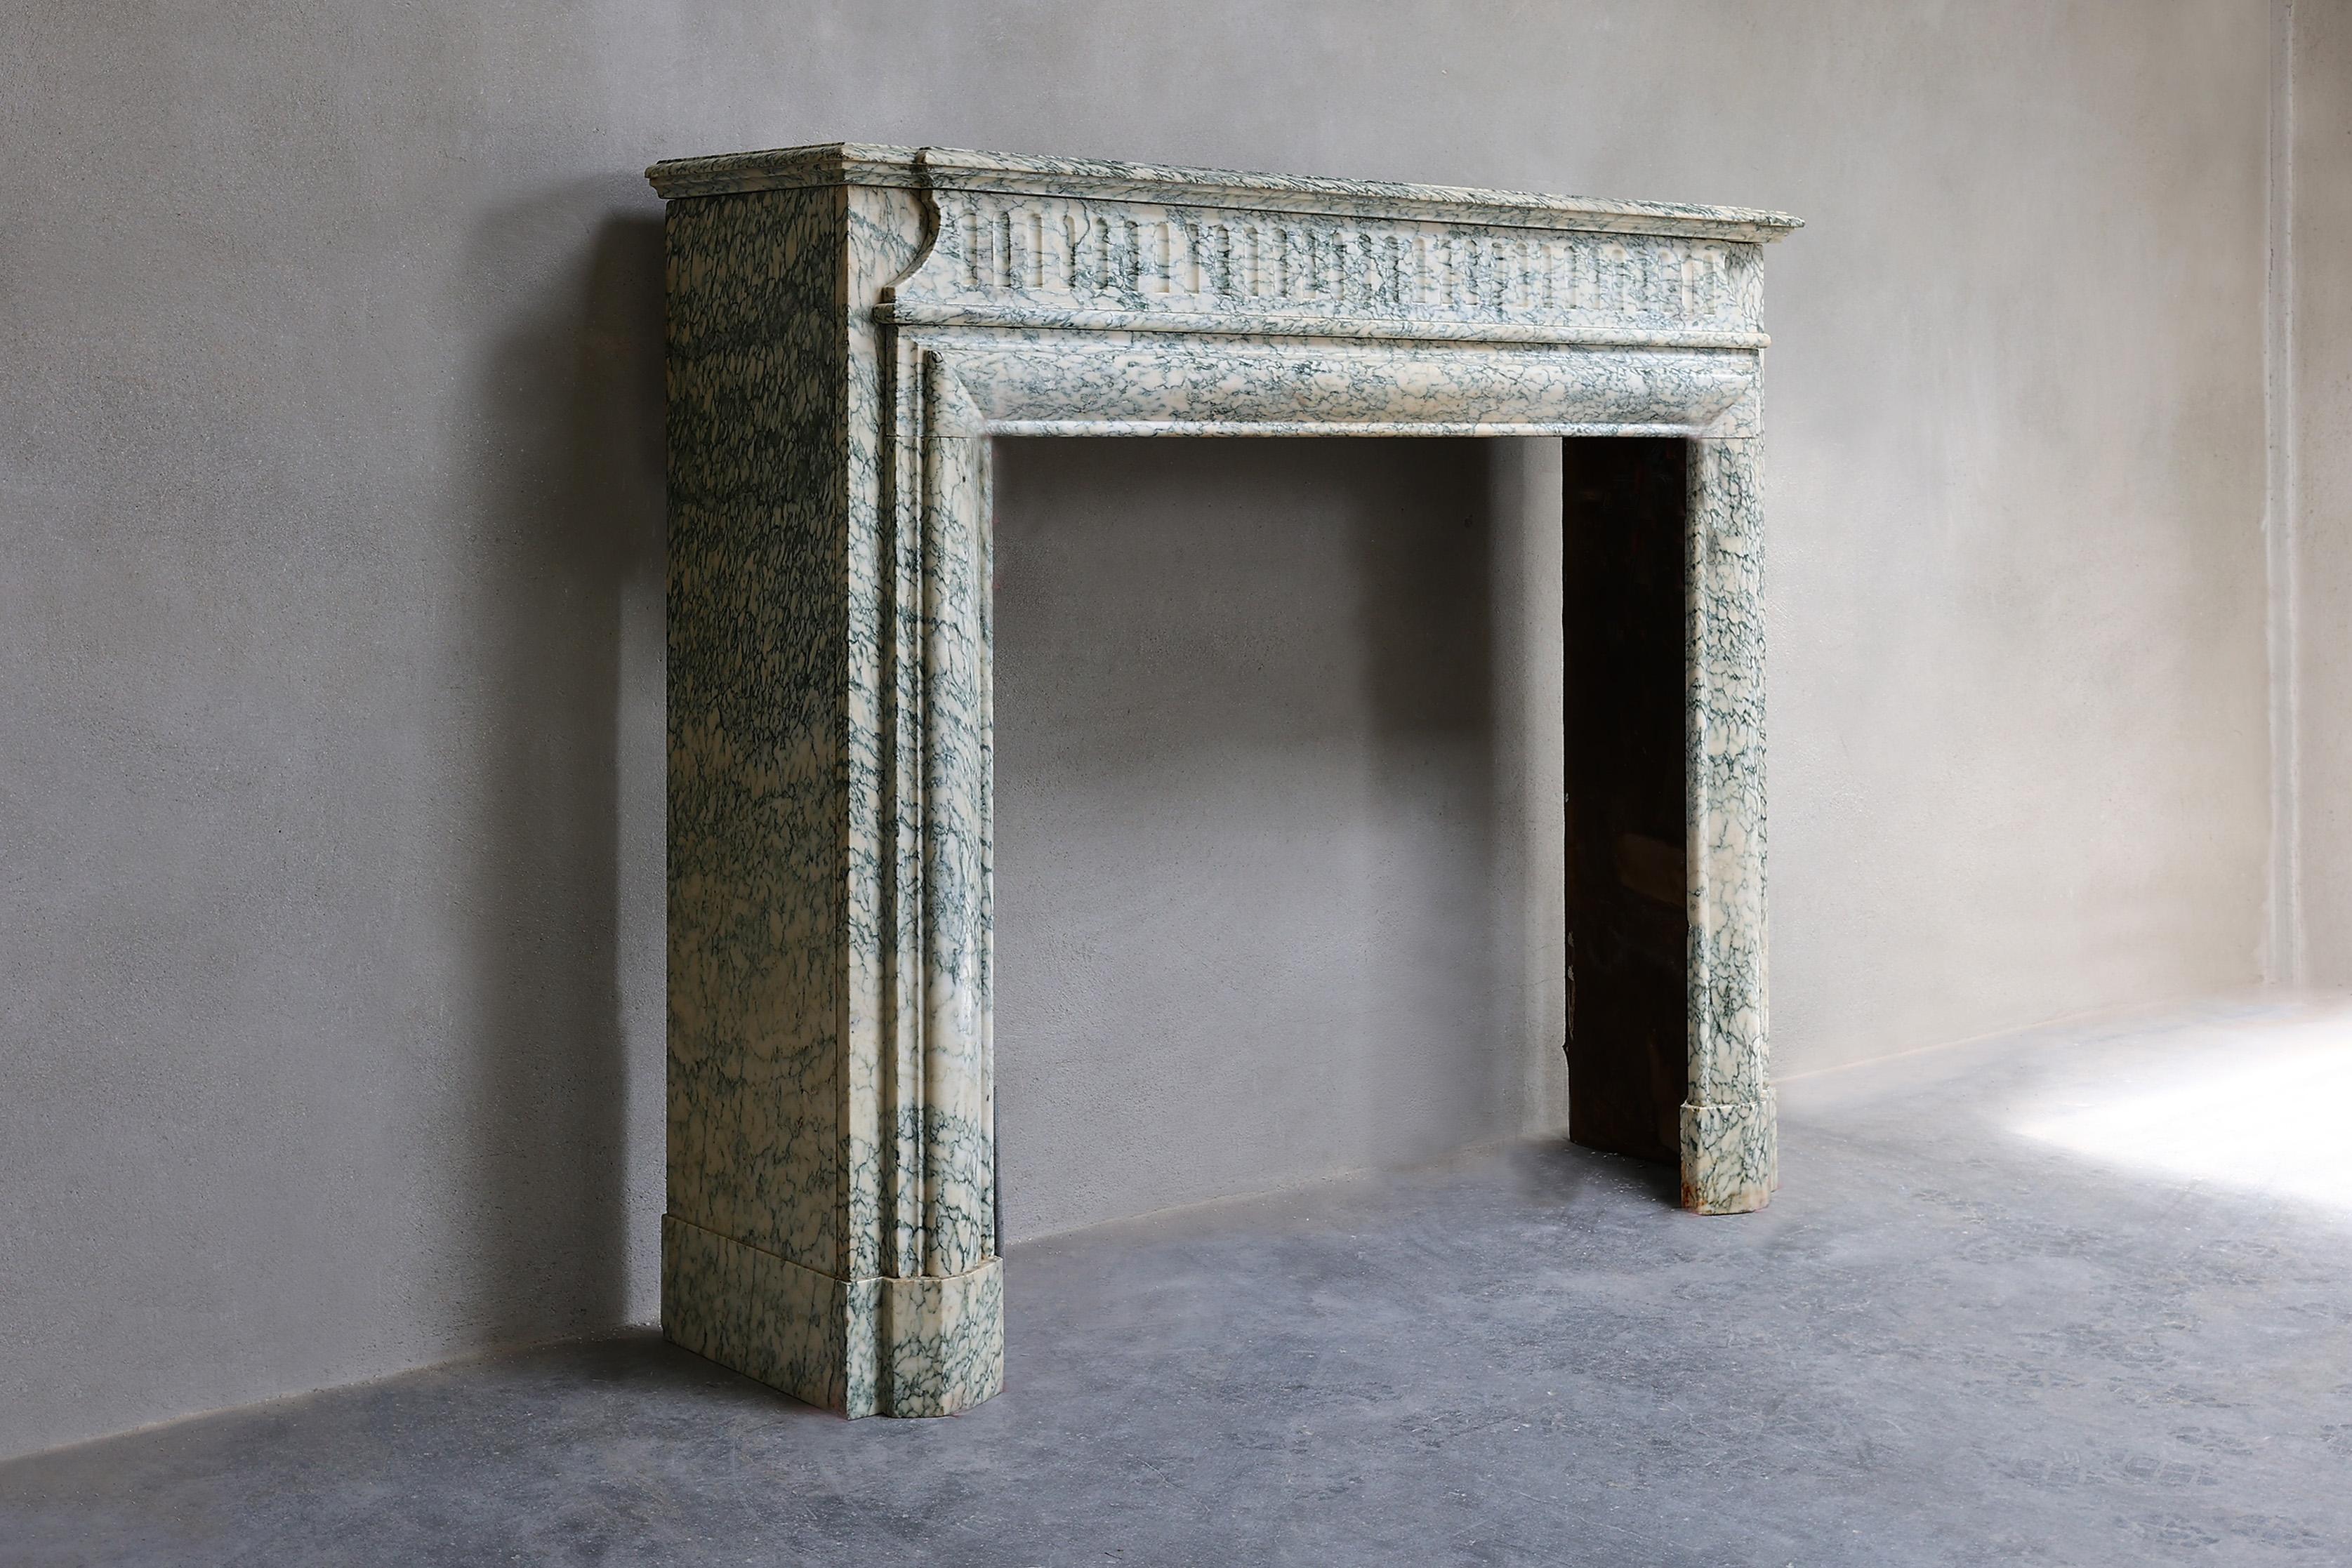 An antique fireplace with a straight design and many fluting in the top. The legs are richly decorated with beautiful lines and the size of this Vert d'estours marble fireplace is compact and suitable for many interiors.